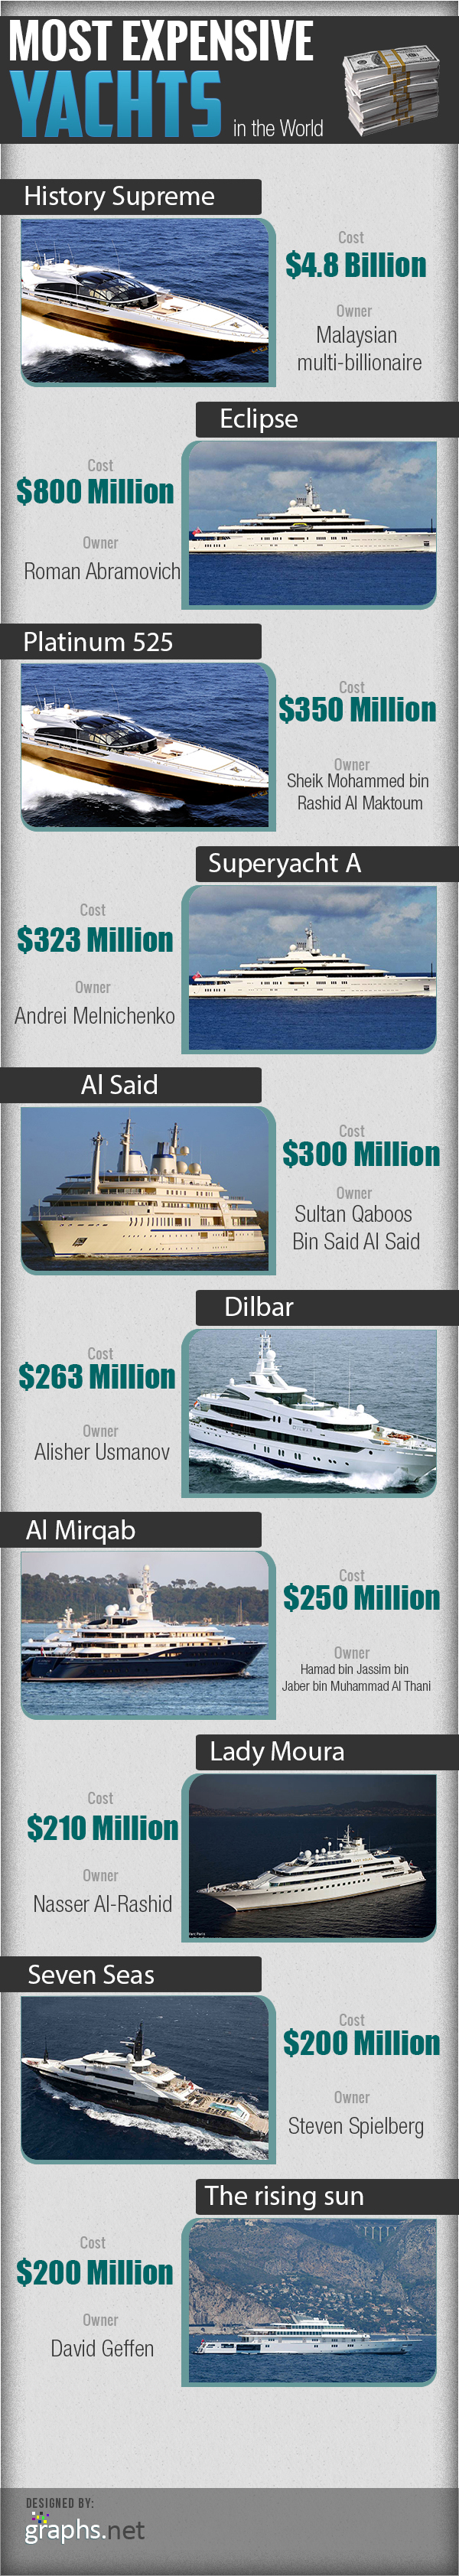 Most-Expensive-Yachts-in-the-World